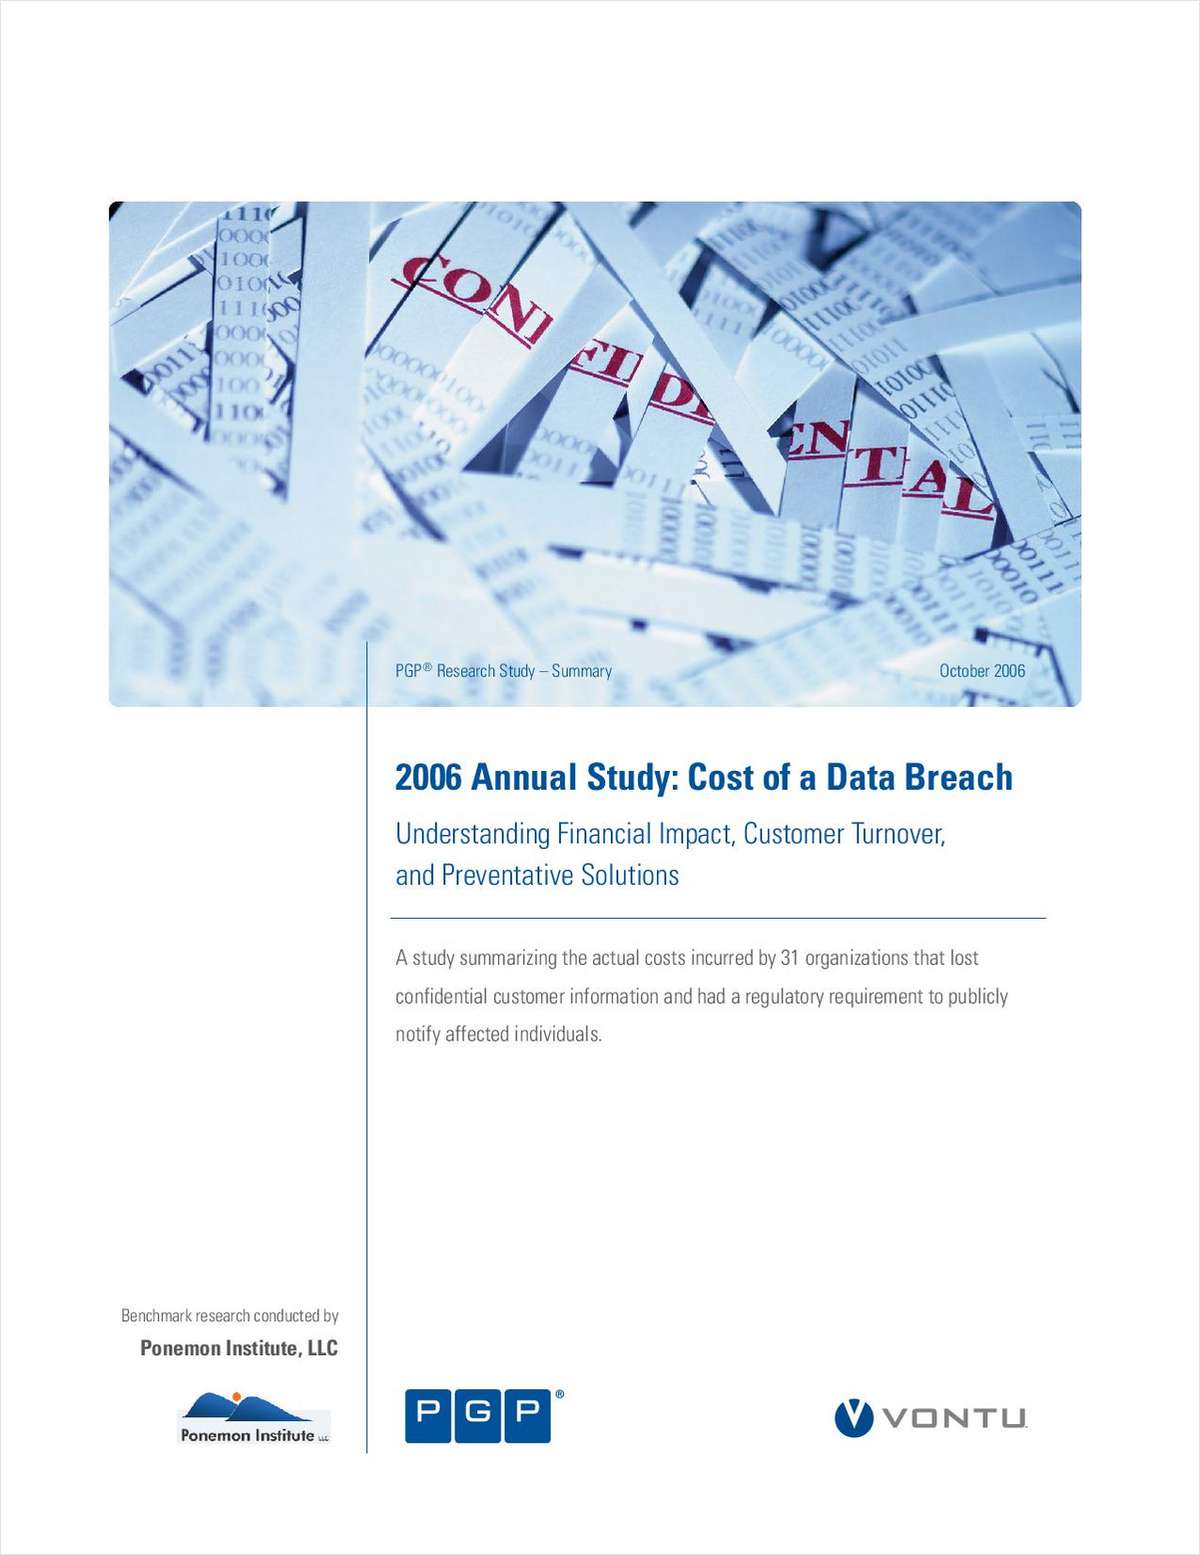 Lost Customer Information: What Does a Data Breach Cost Companies?